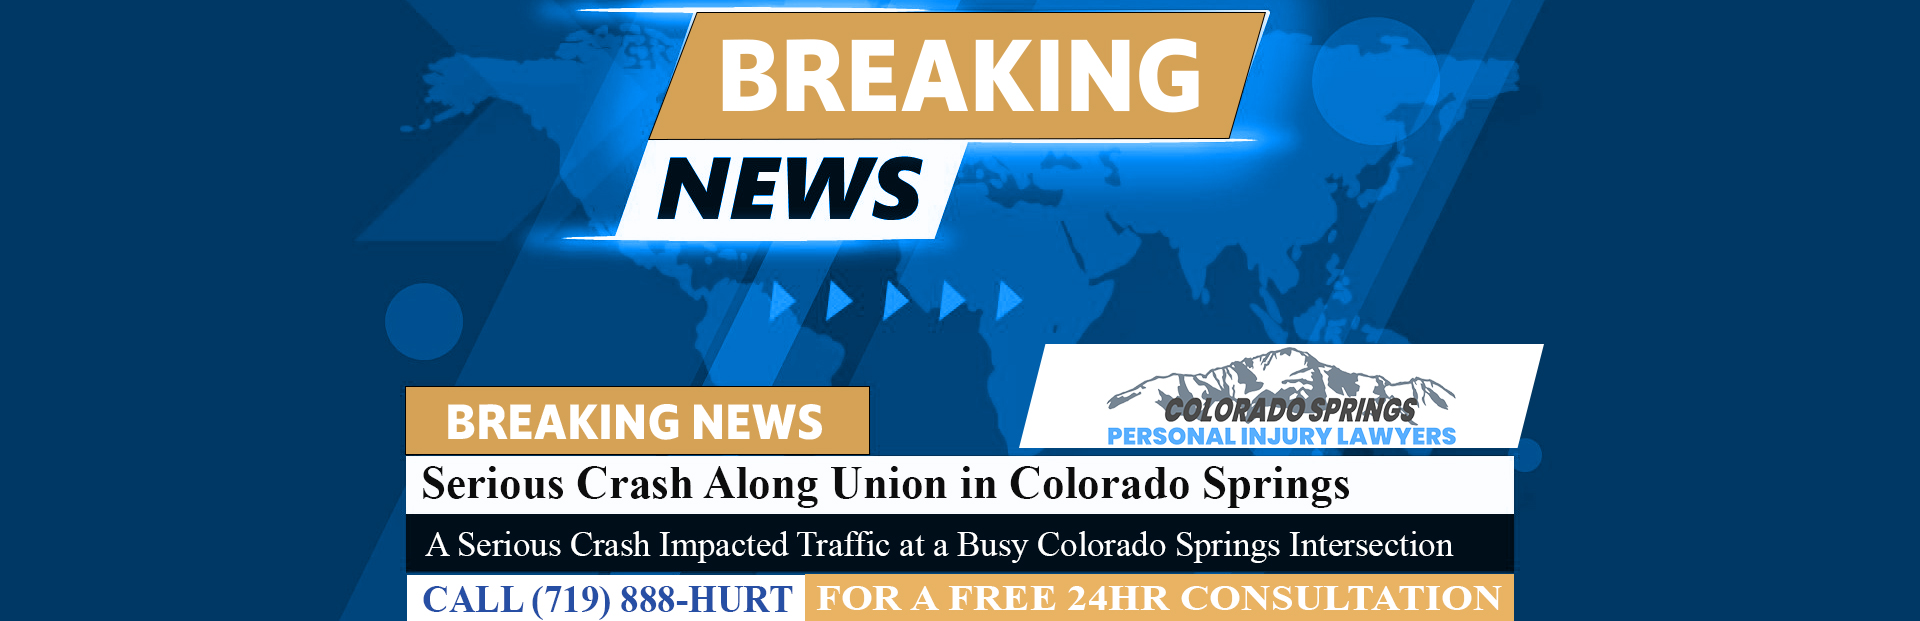 [12-06-23] Serious Crash Along Union in Colorado Springs at Research on Monday